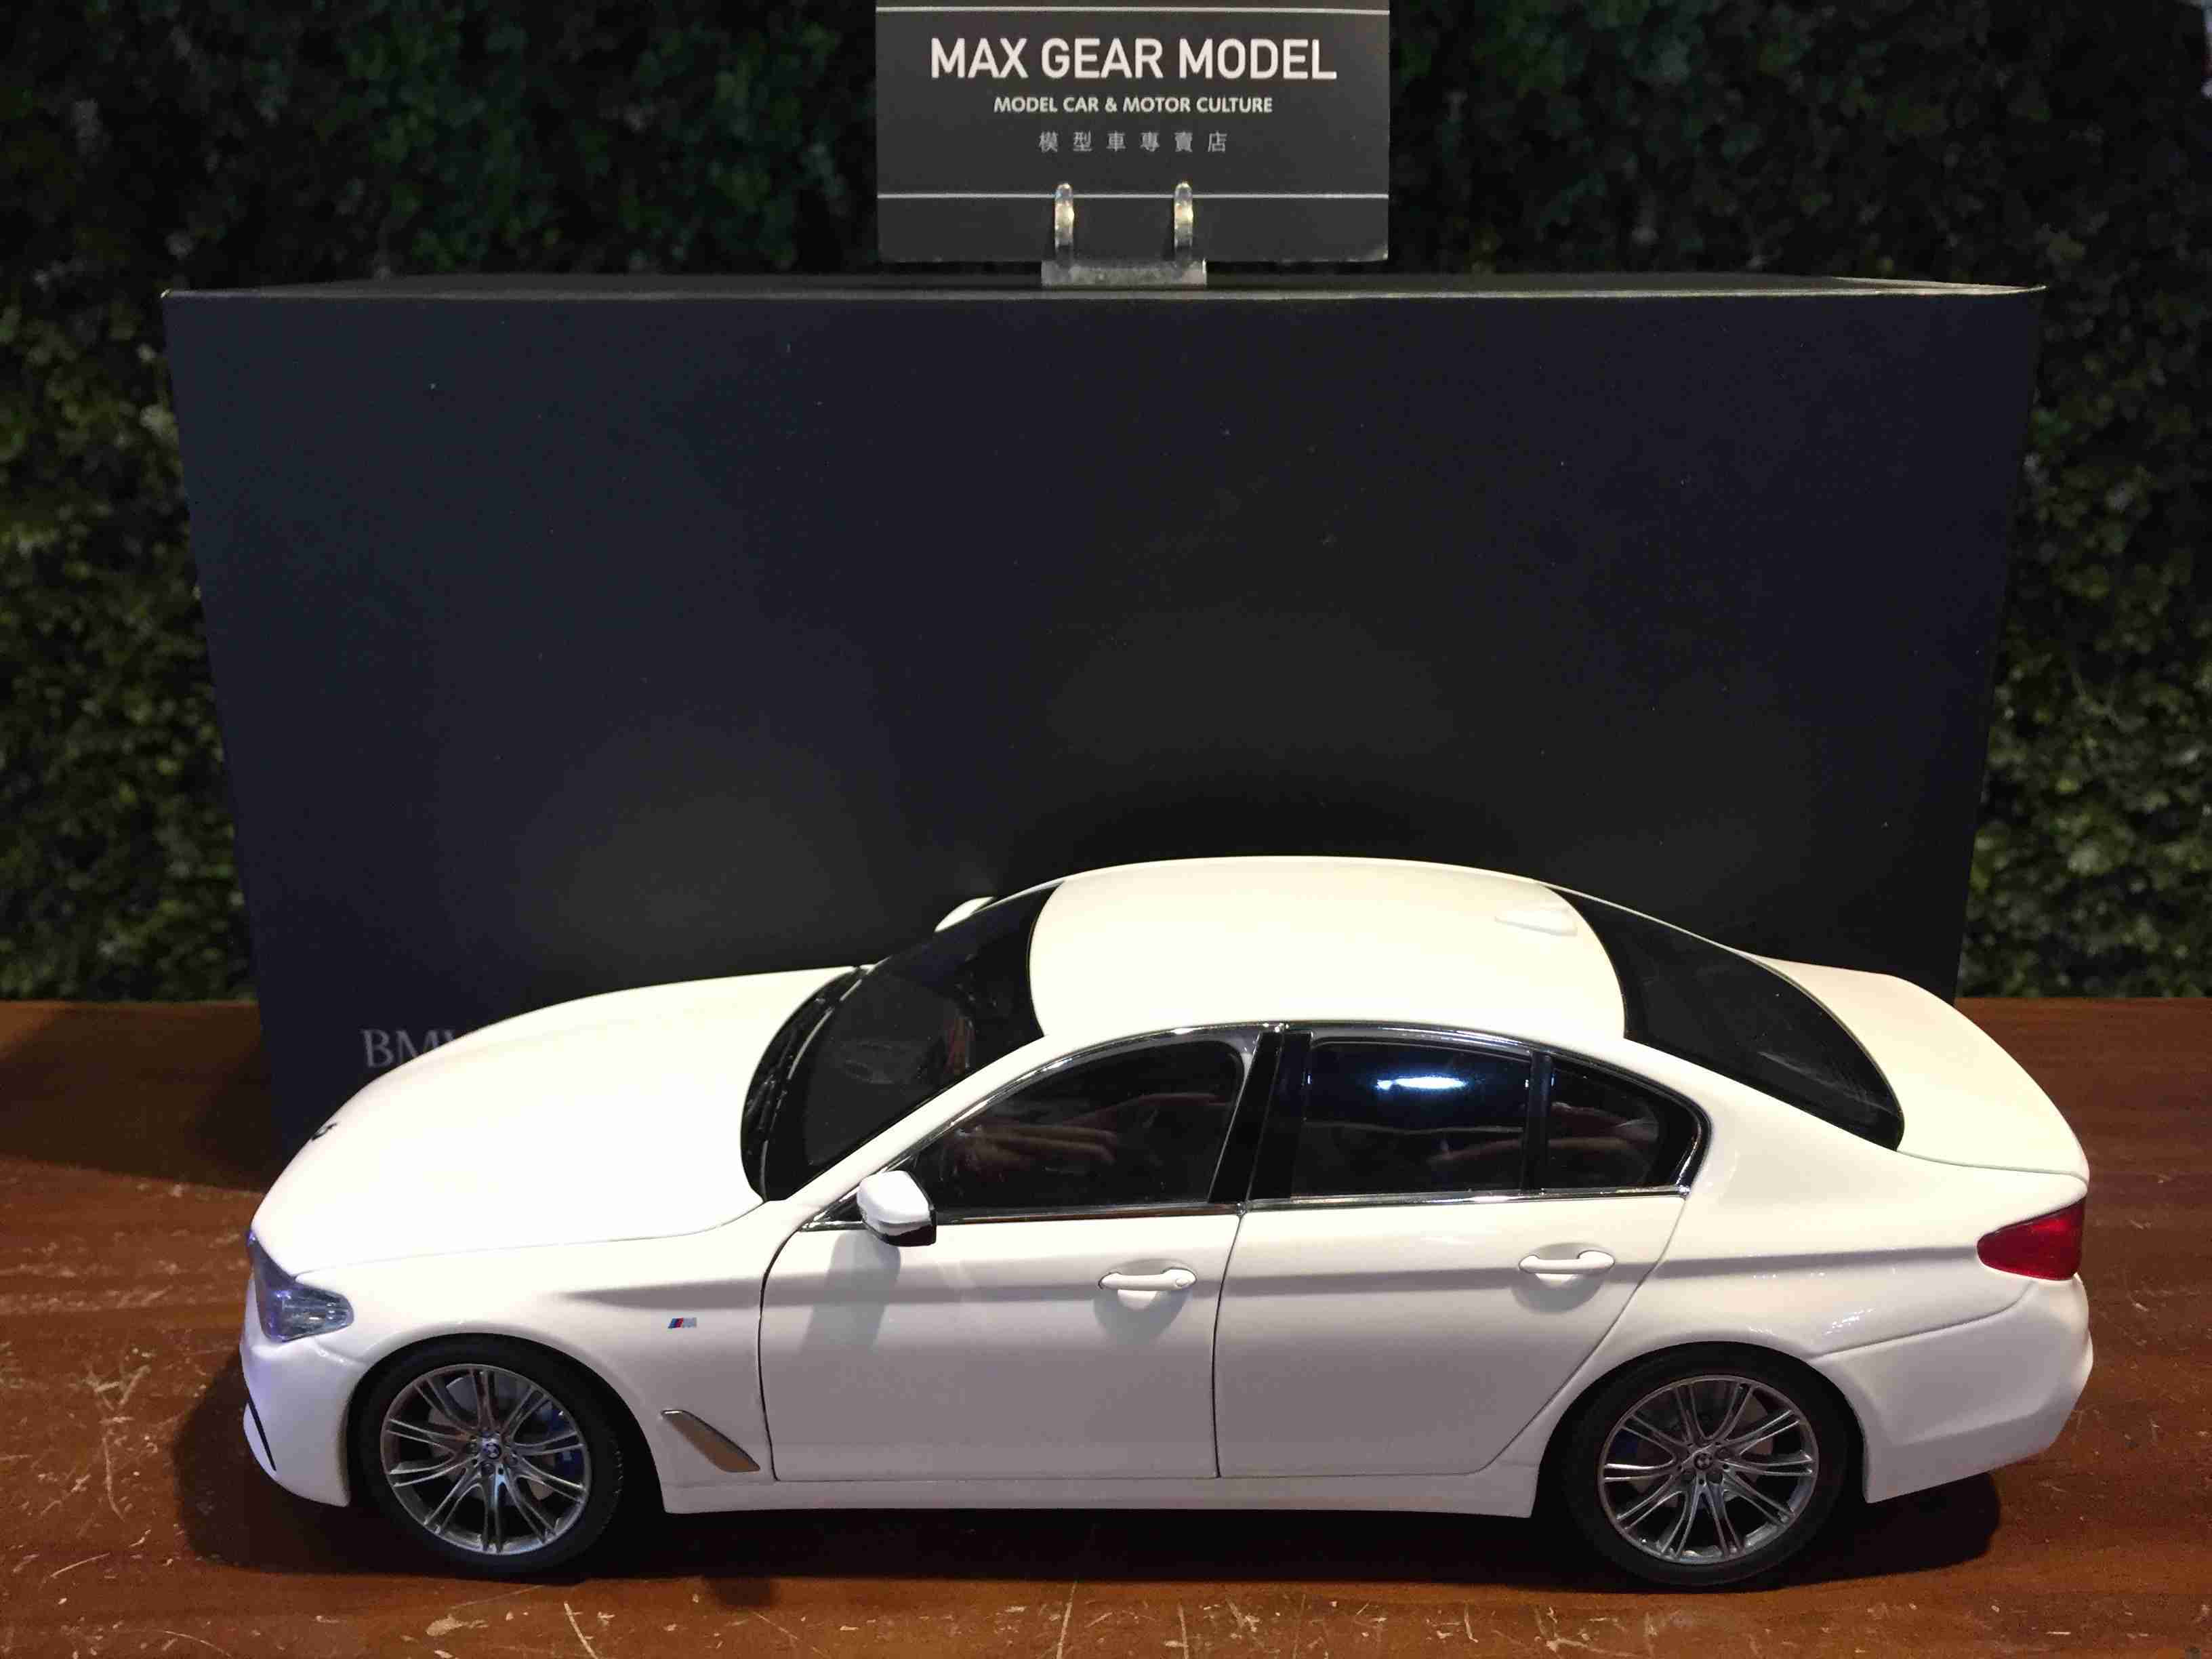 1/18 Kyosho BMW 5 Series (G30) Mineral White 08941W【MGM】 - Max